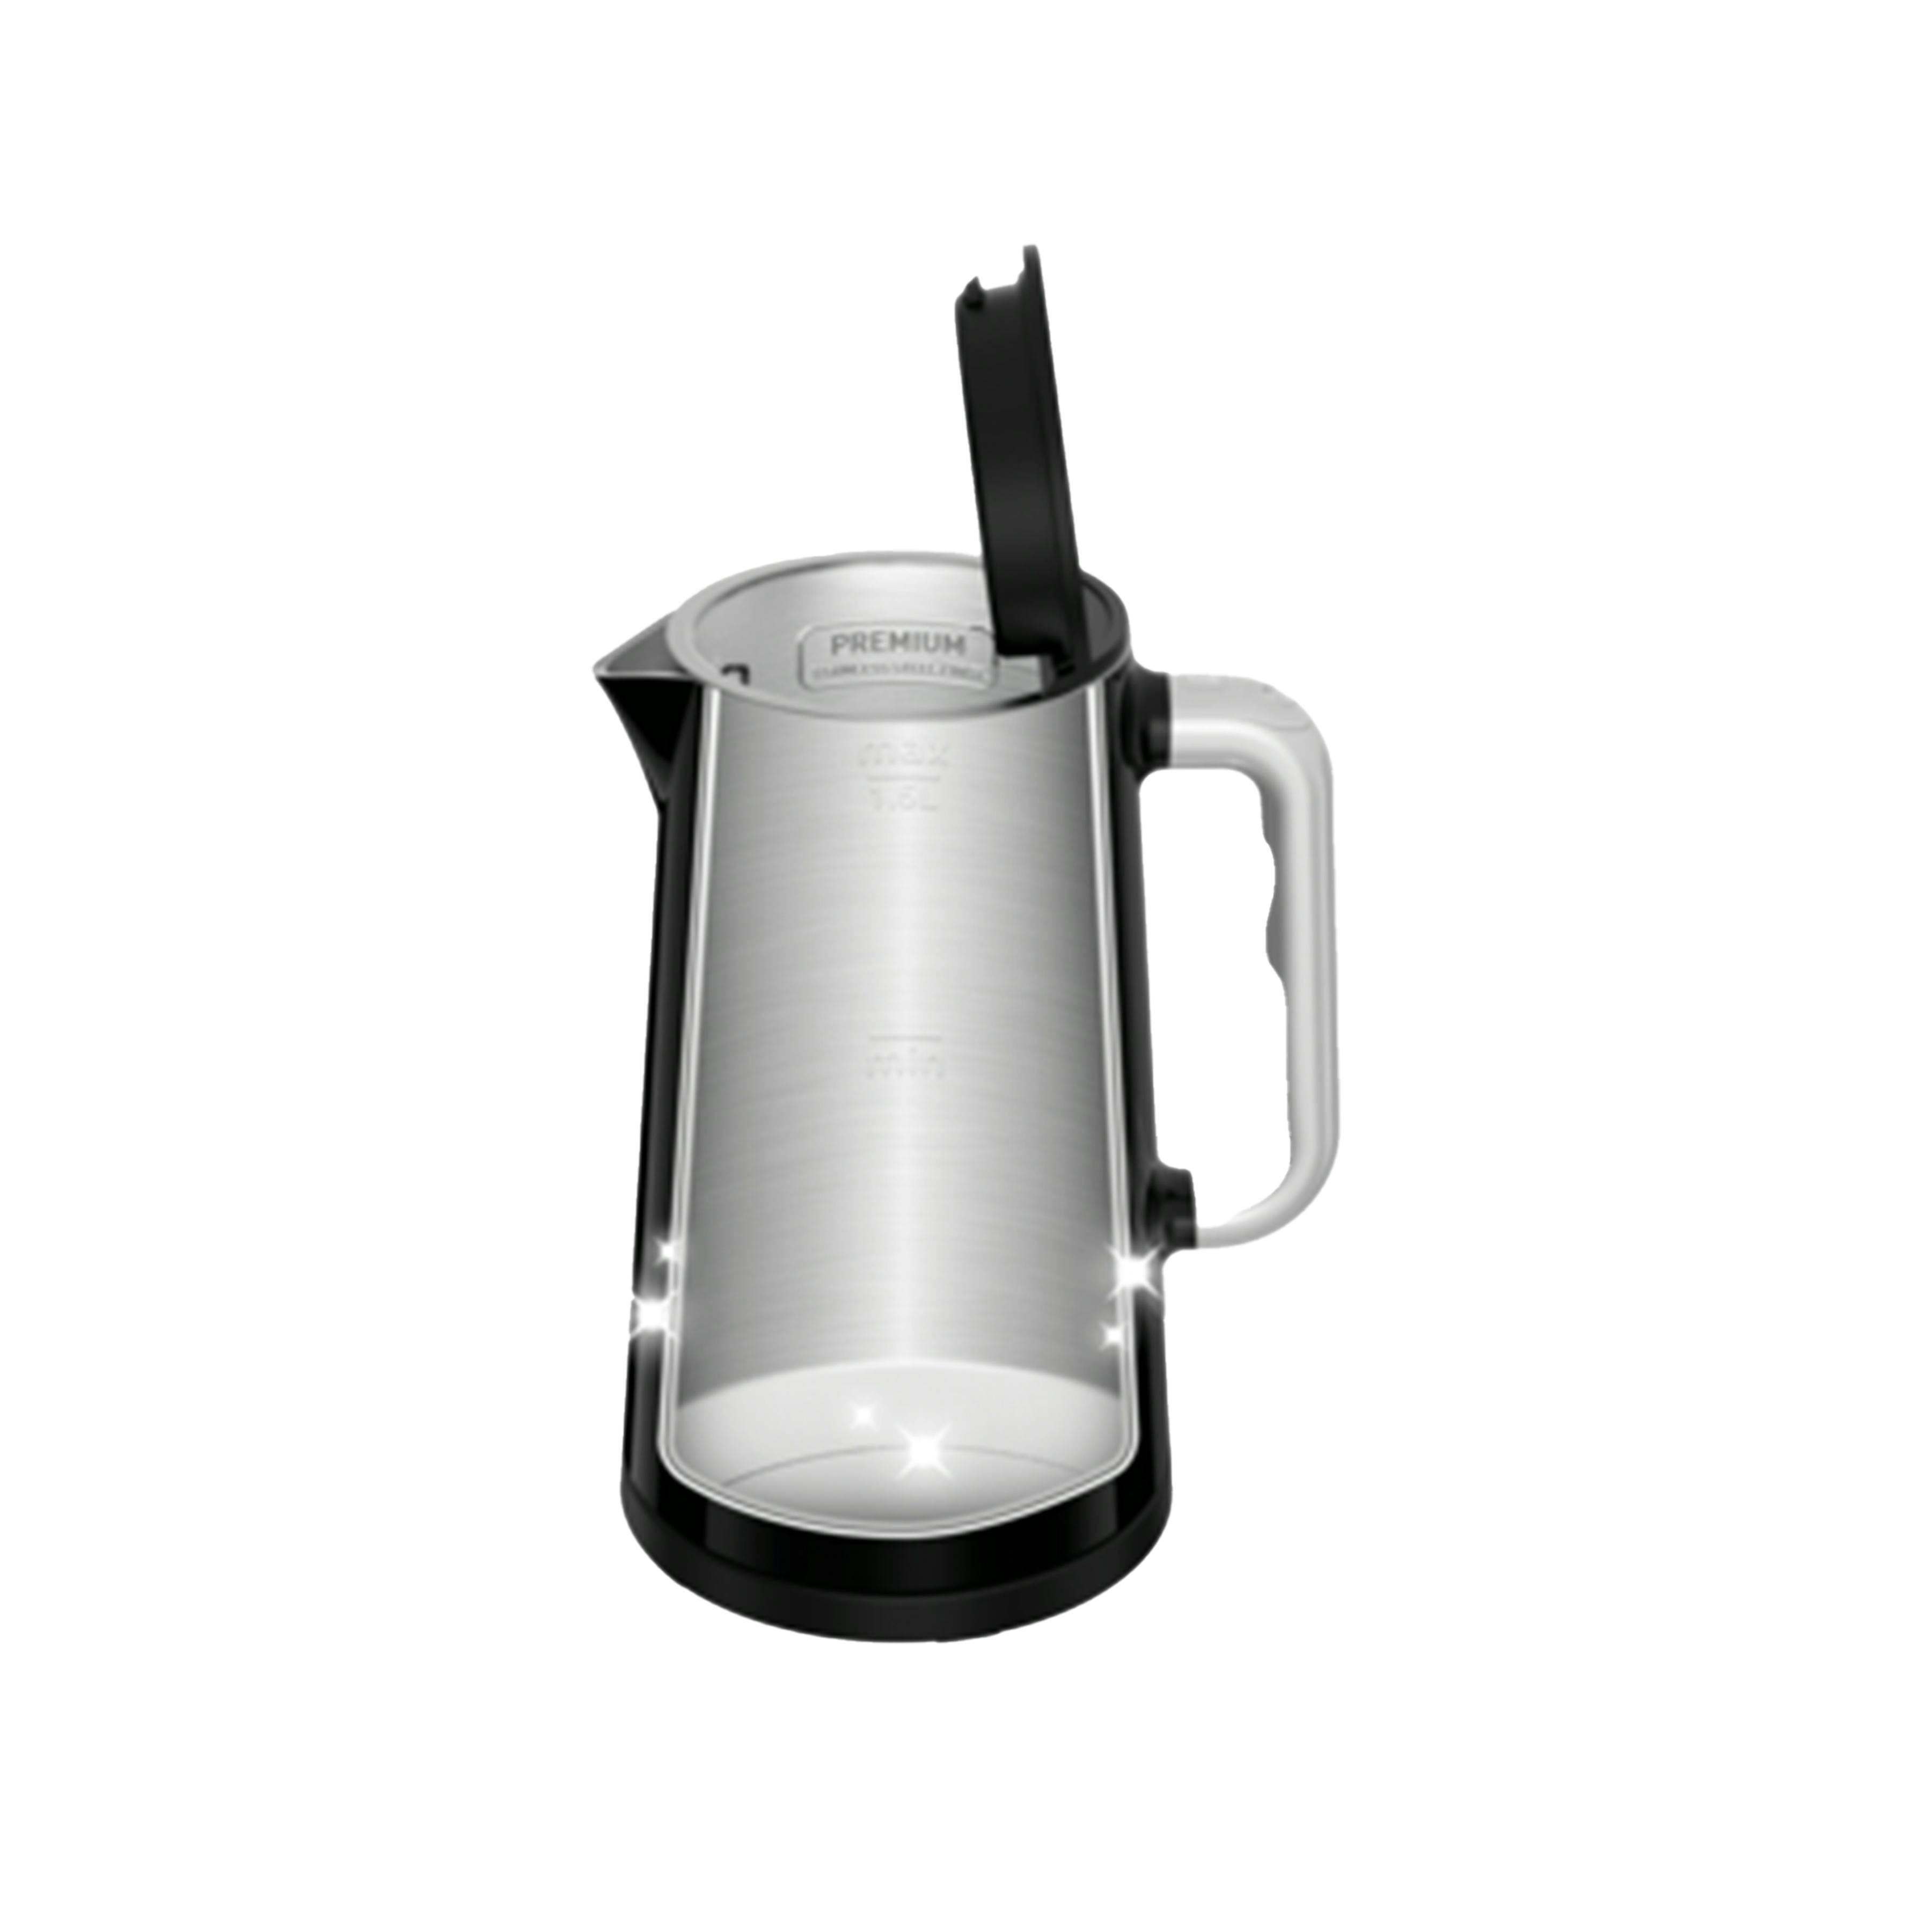 Tefal Kettles (7 products) compare prices today »